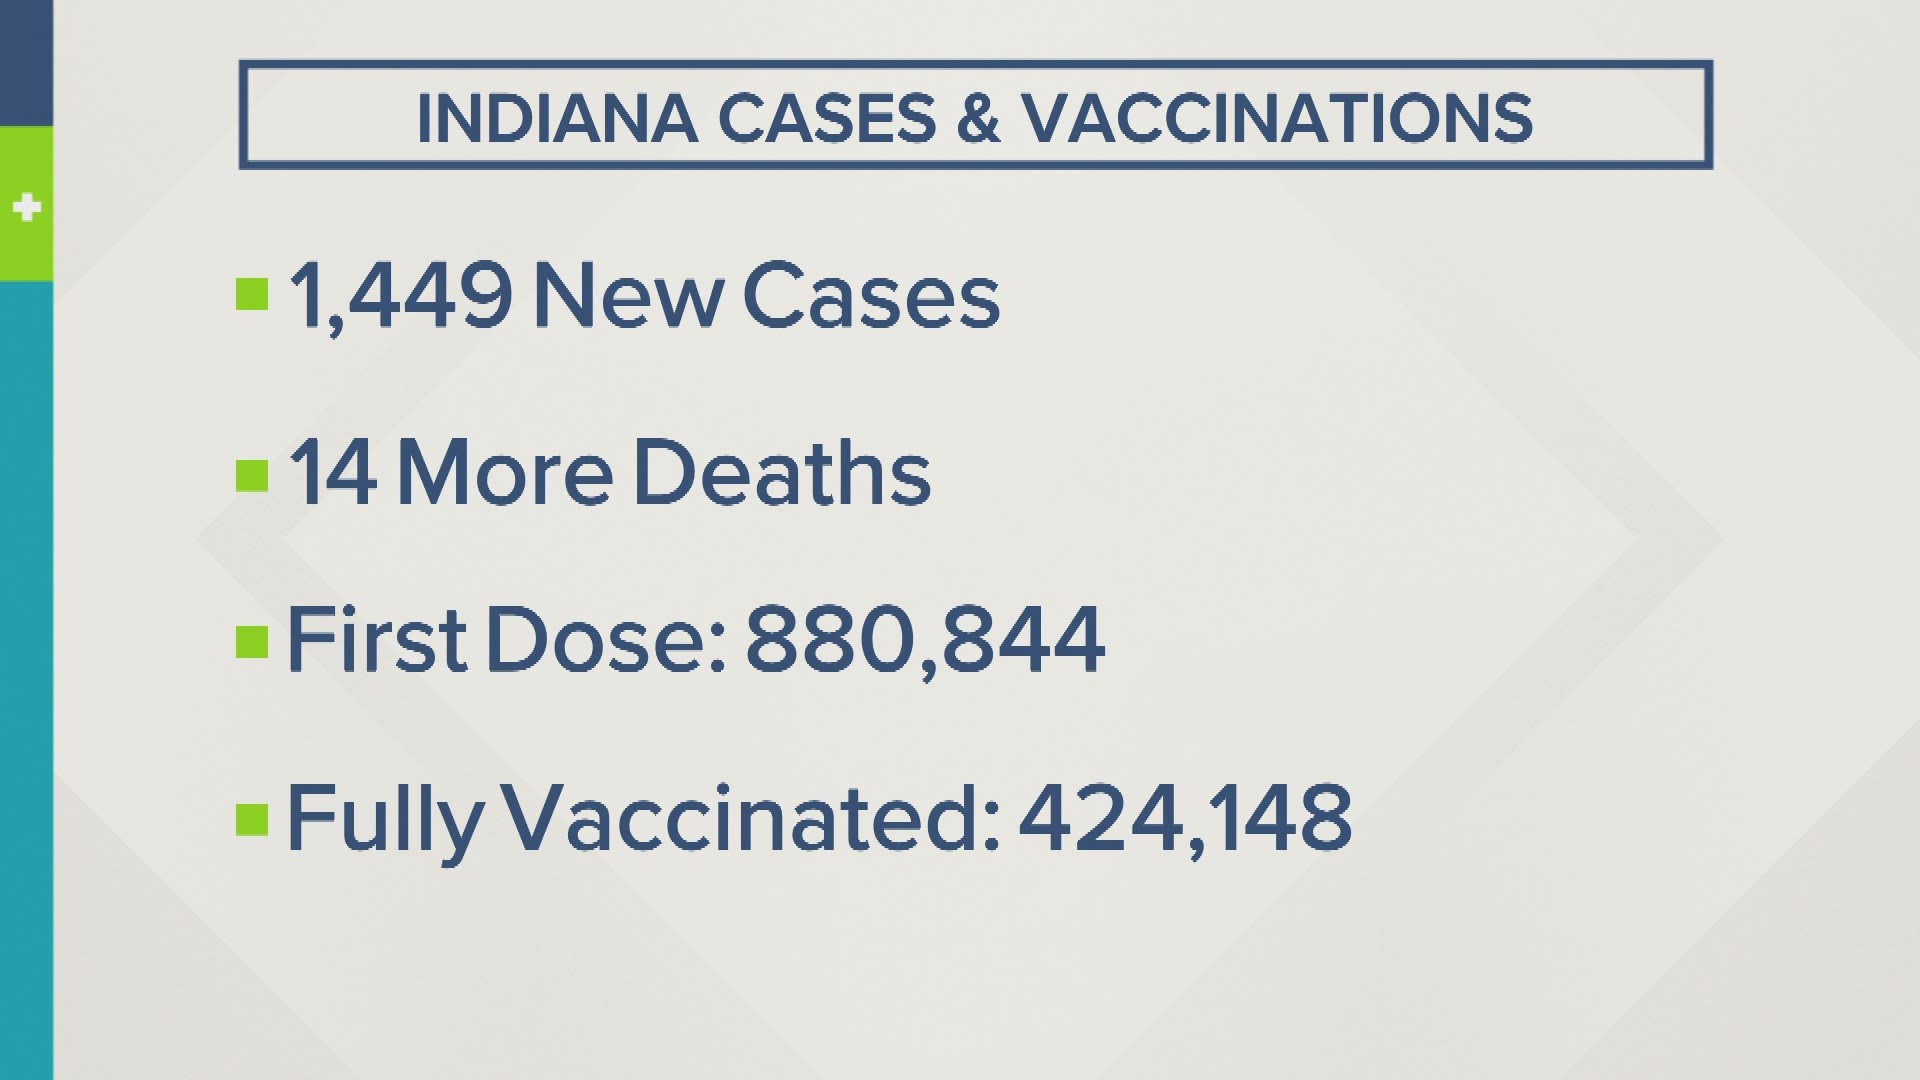 The latest Indiana headlines in the COVID-19 pandemic.